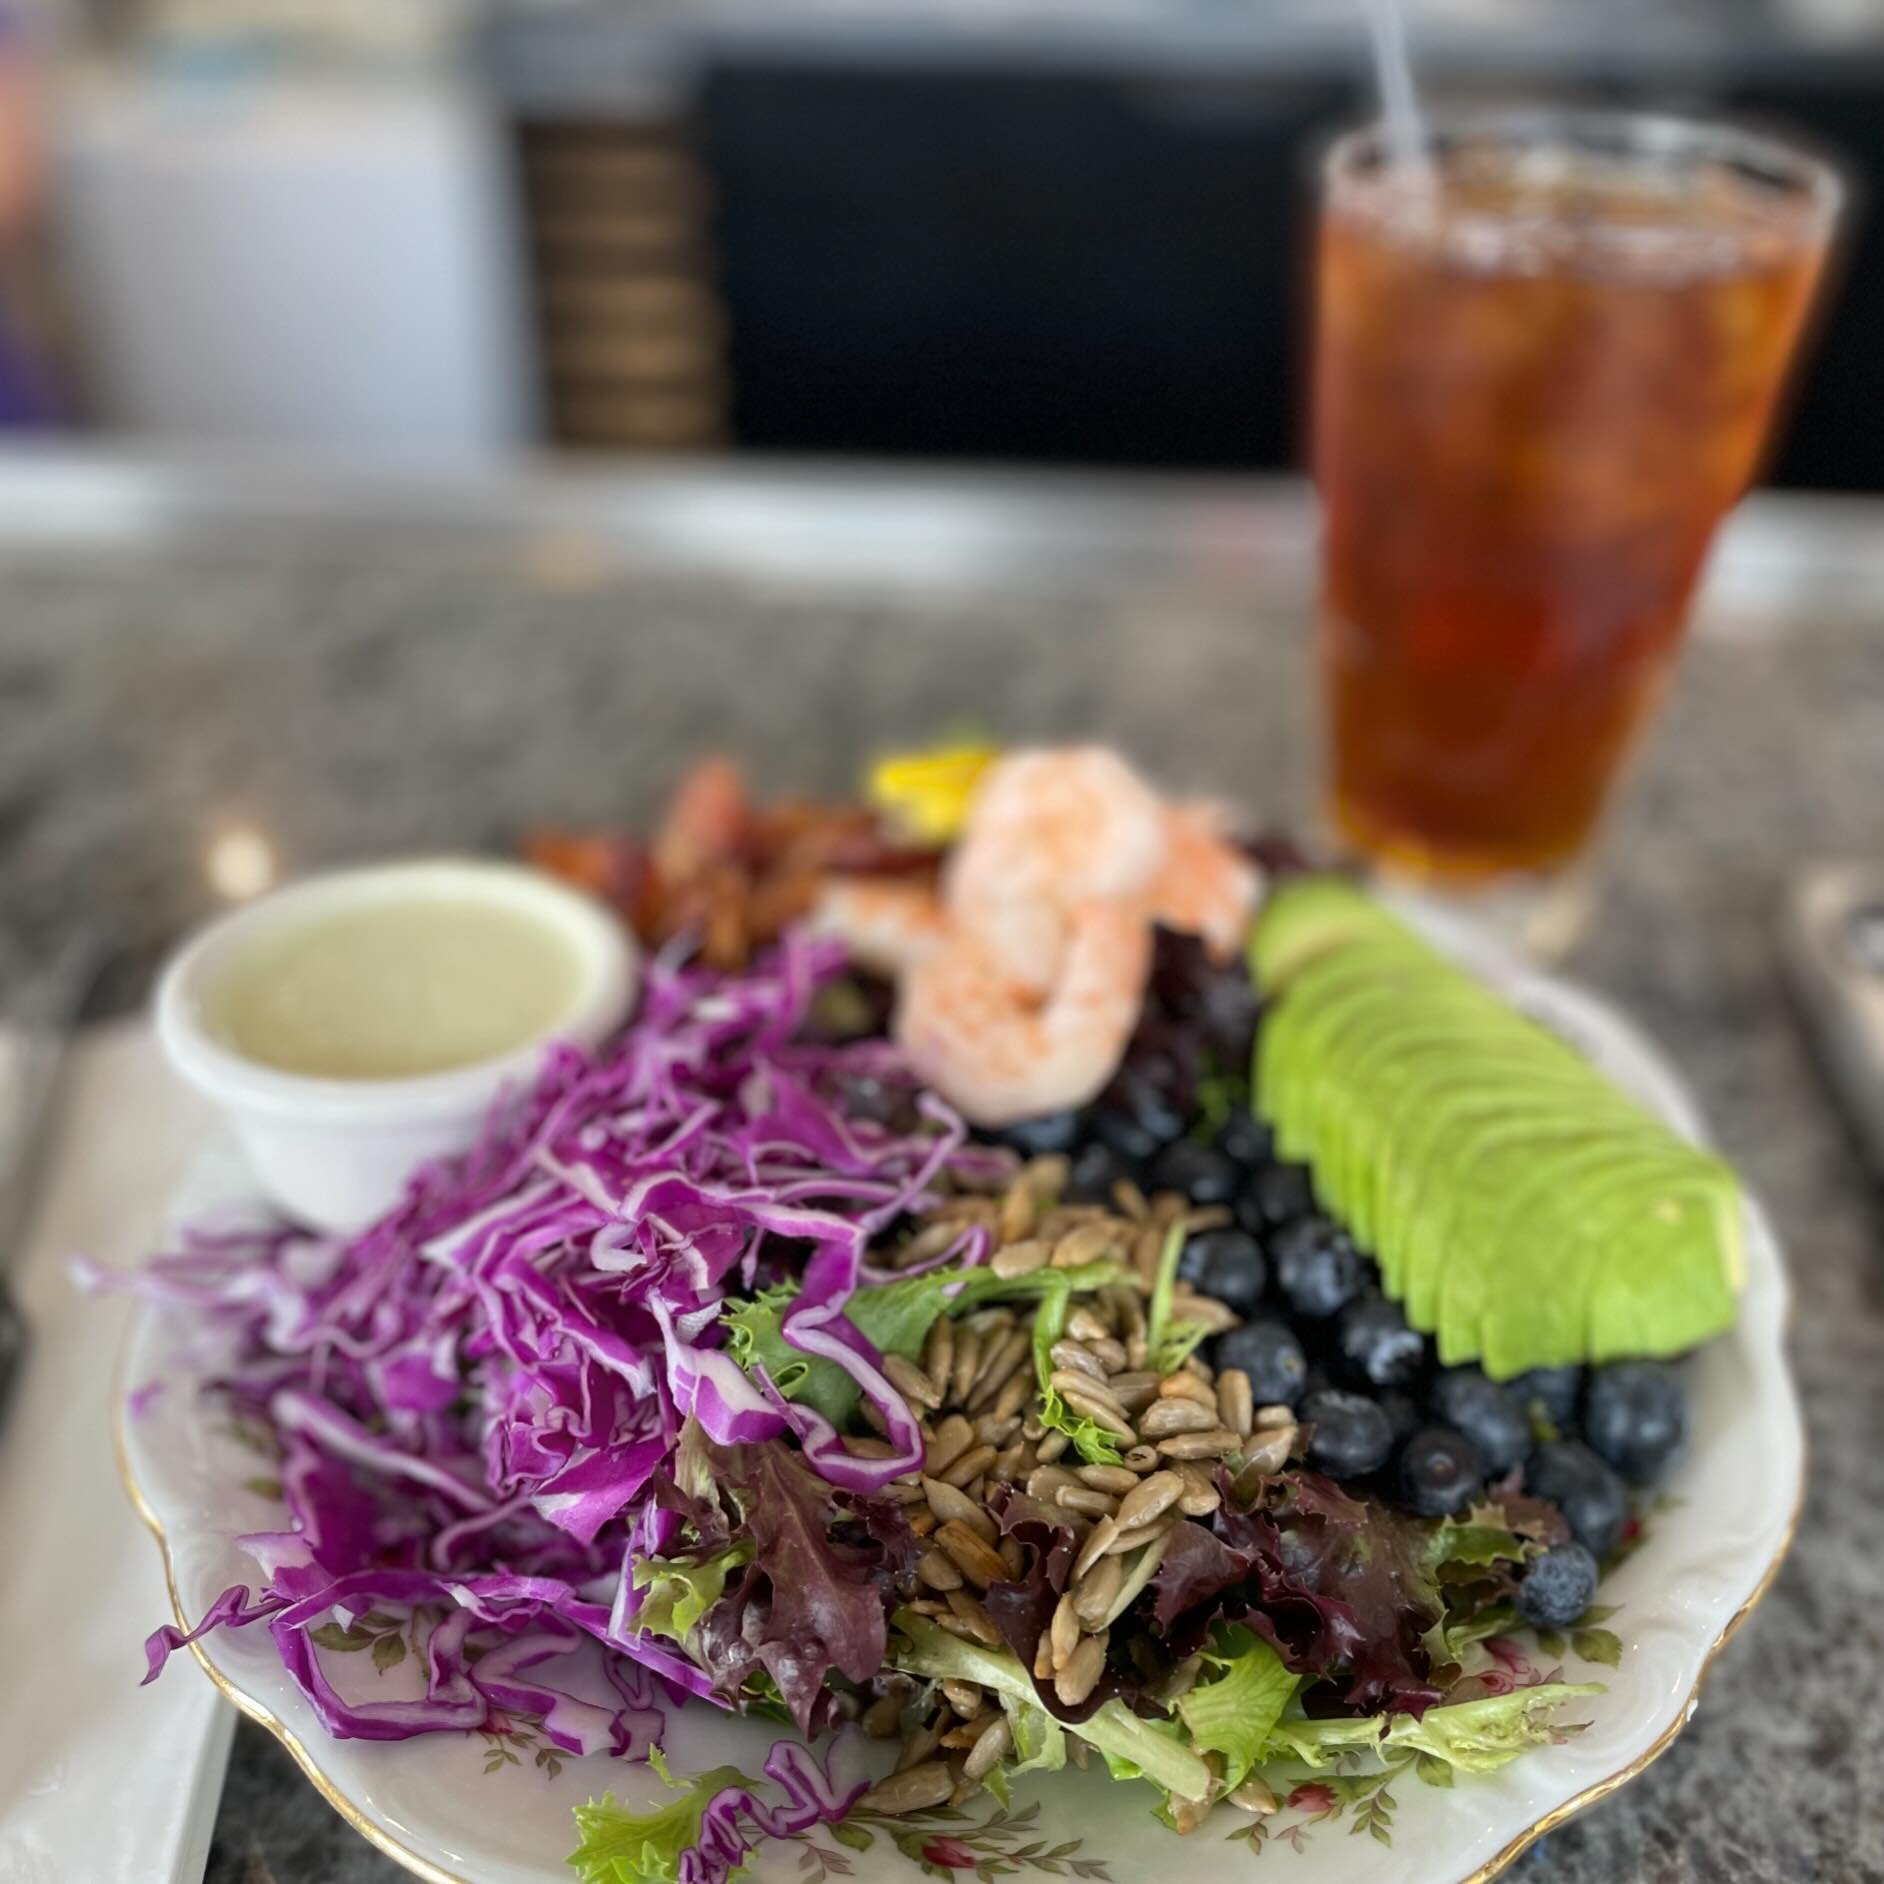 Wild Blu Salad 🥗 join us for lunch this week! #blulovesyou #salad #summercameearly #lunchtime #brunch #downtownarlingtonheights